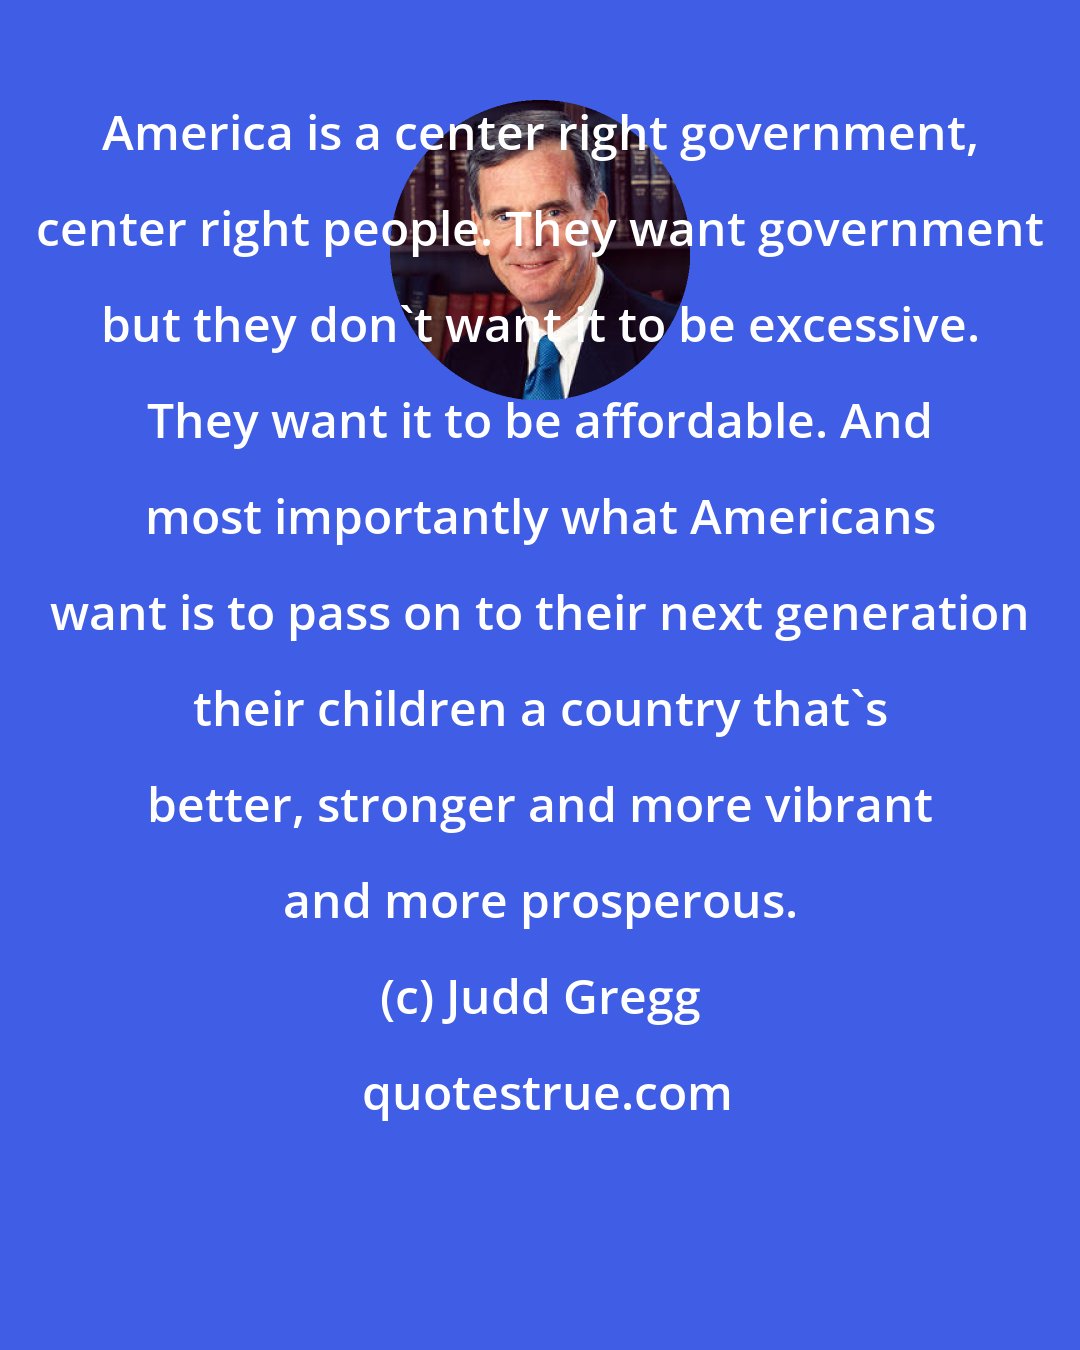 Judd Gregg: America is a center right government, center right people. They want government but they don't want it to be excessive. They want it to be affordable. And most importantly what Americans want is to pass on to their next generation their children a country that's better, stronger and more vibrant and more prosperous.